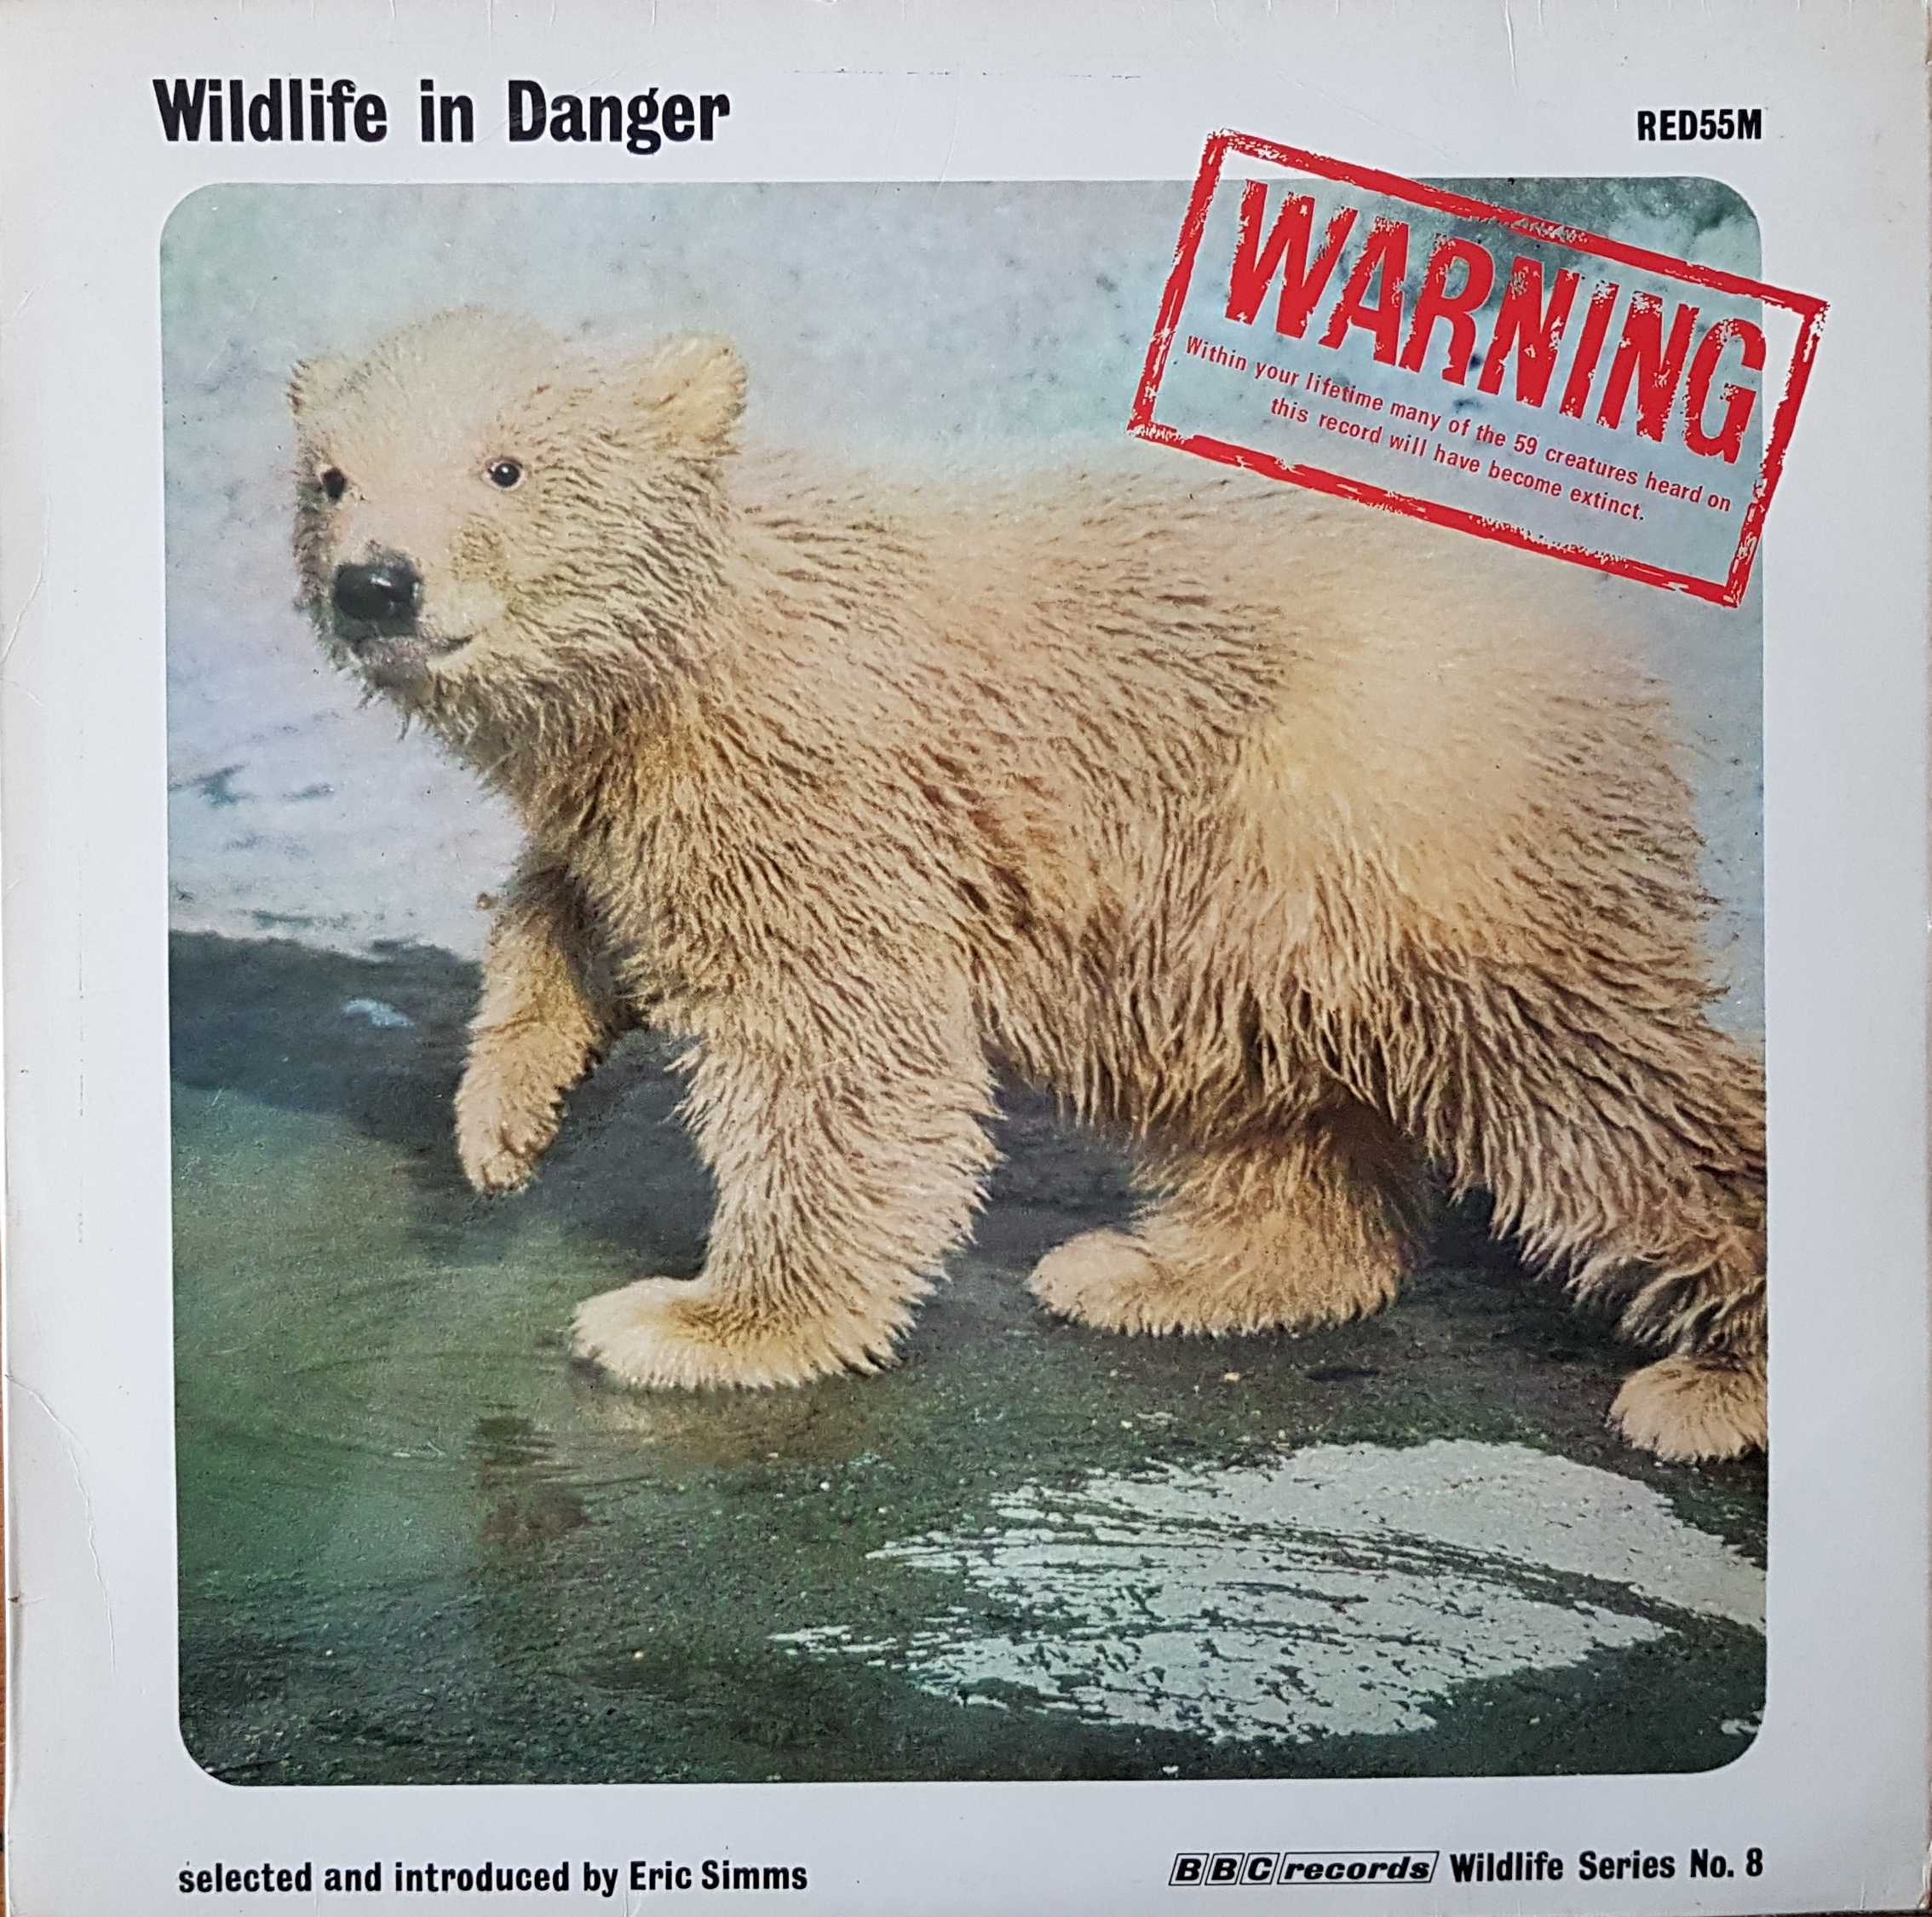 Picture of RED 55 Wildlife in danger - BBC wildlife series no. 8 by artist Various from the BBC albums - Records and Tapes library